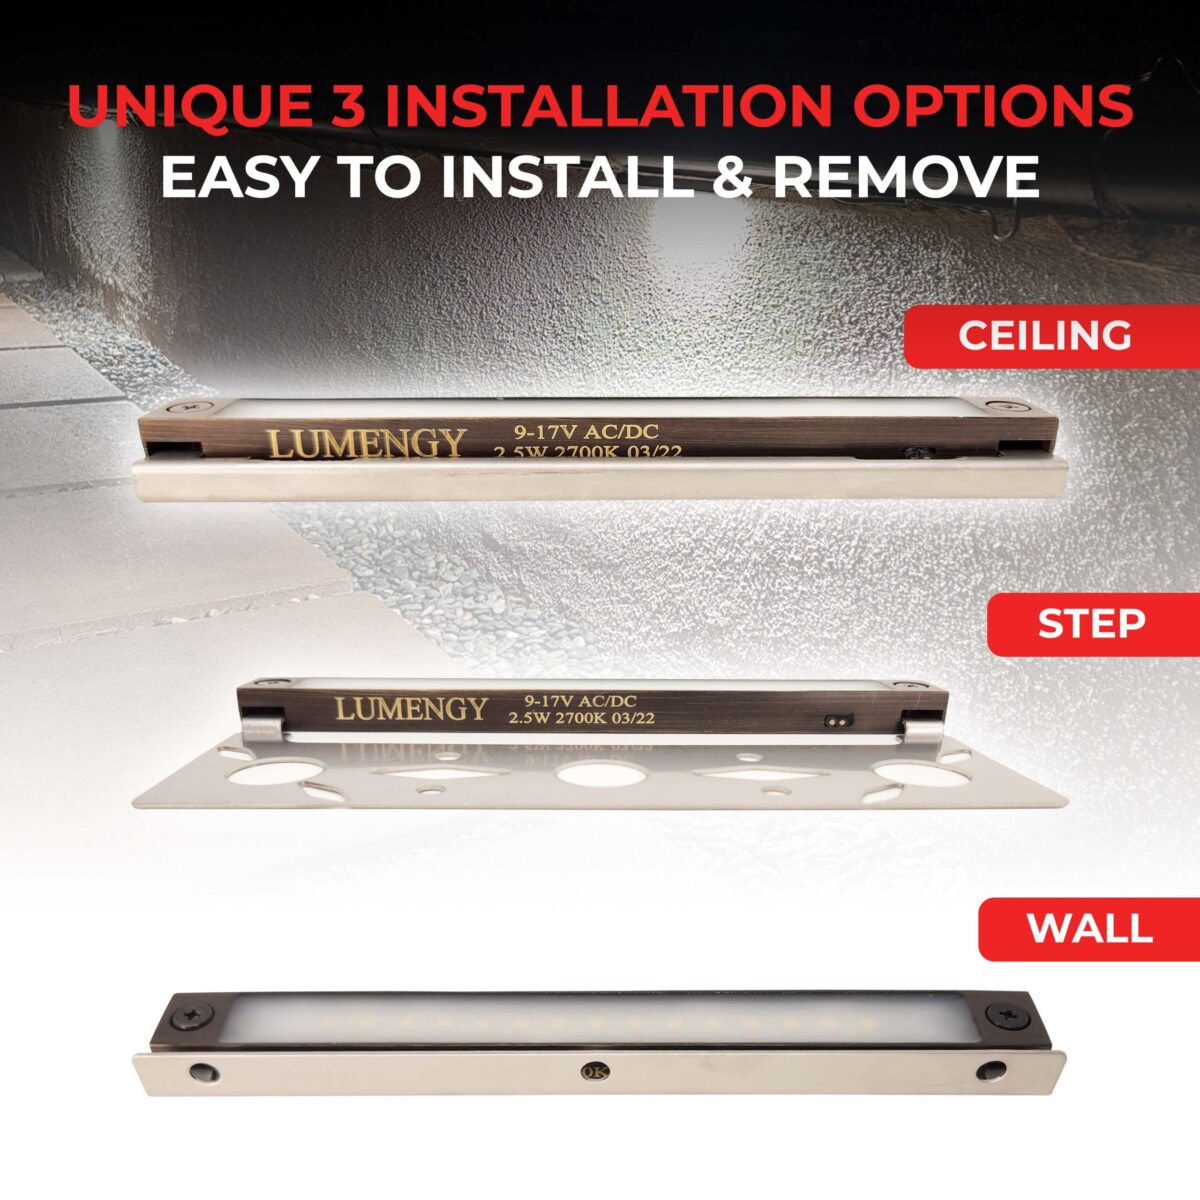 Easy Installation and removable for Ceiling, Step, and Wall